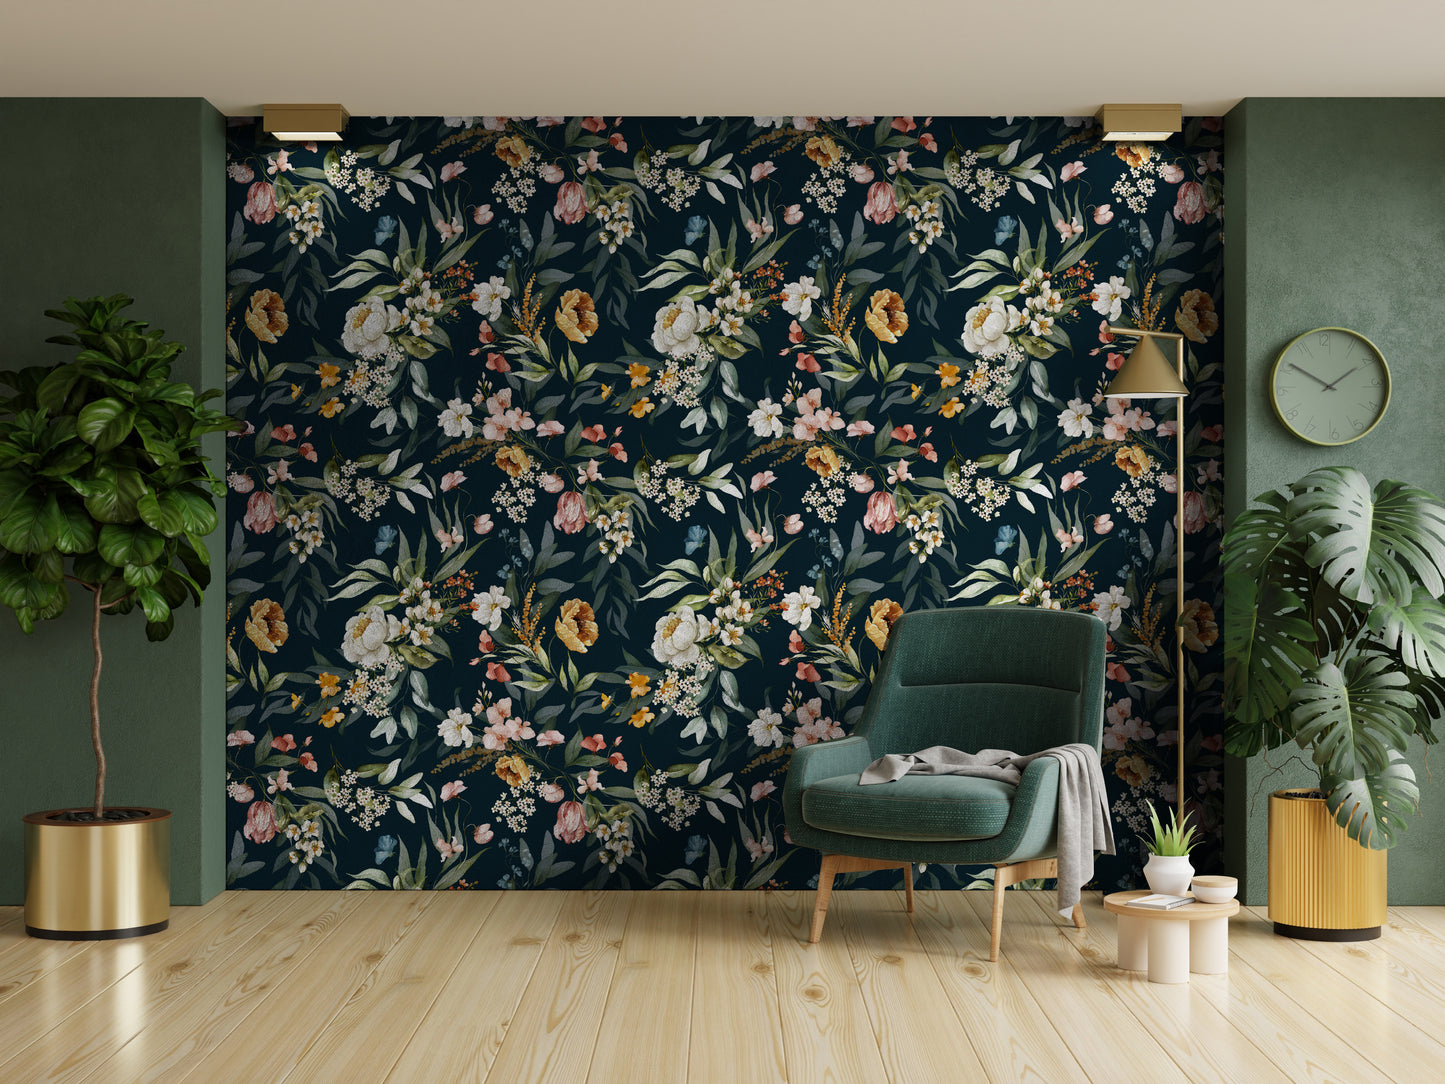 Floral peony wallpaper shown next green wall